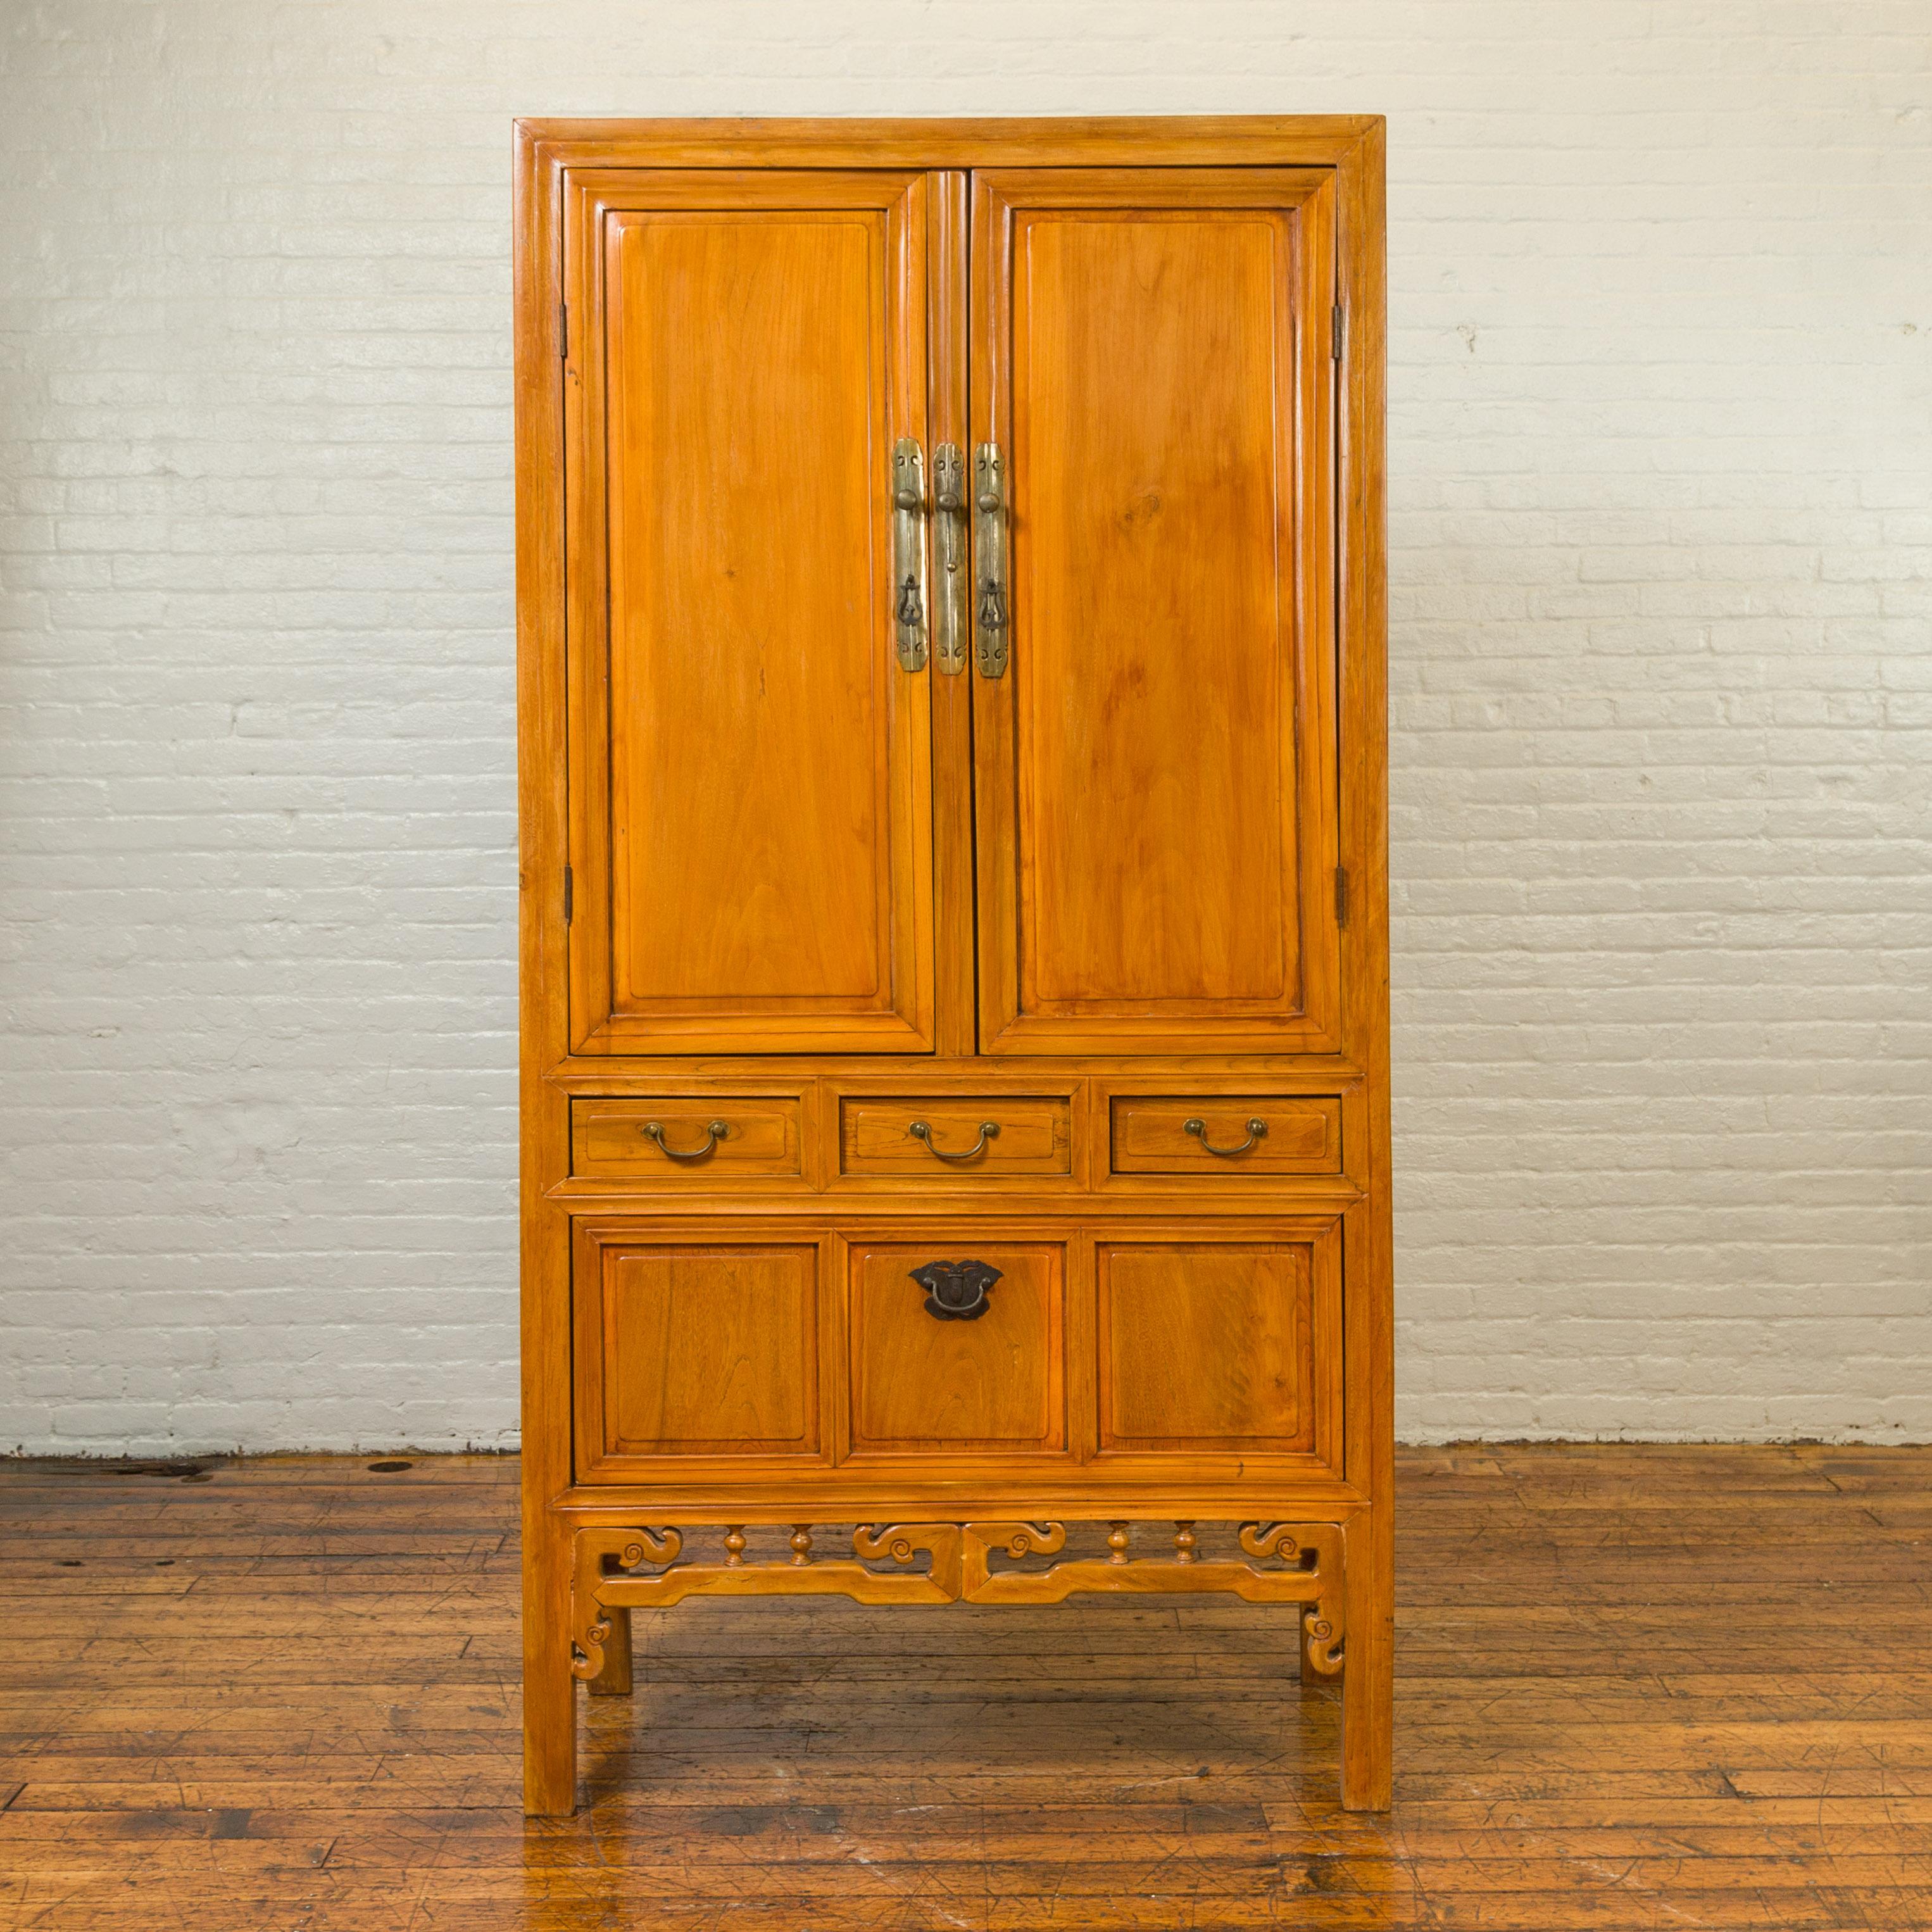 A Chinese Ming dynasty style elmwood antique cabinet from the 19th century, with two doors, drawers and lower removable panel. Crafted in China during the 19th century, this tall cabinet captures our attention with its warm elm finish and convenient